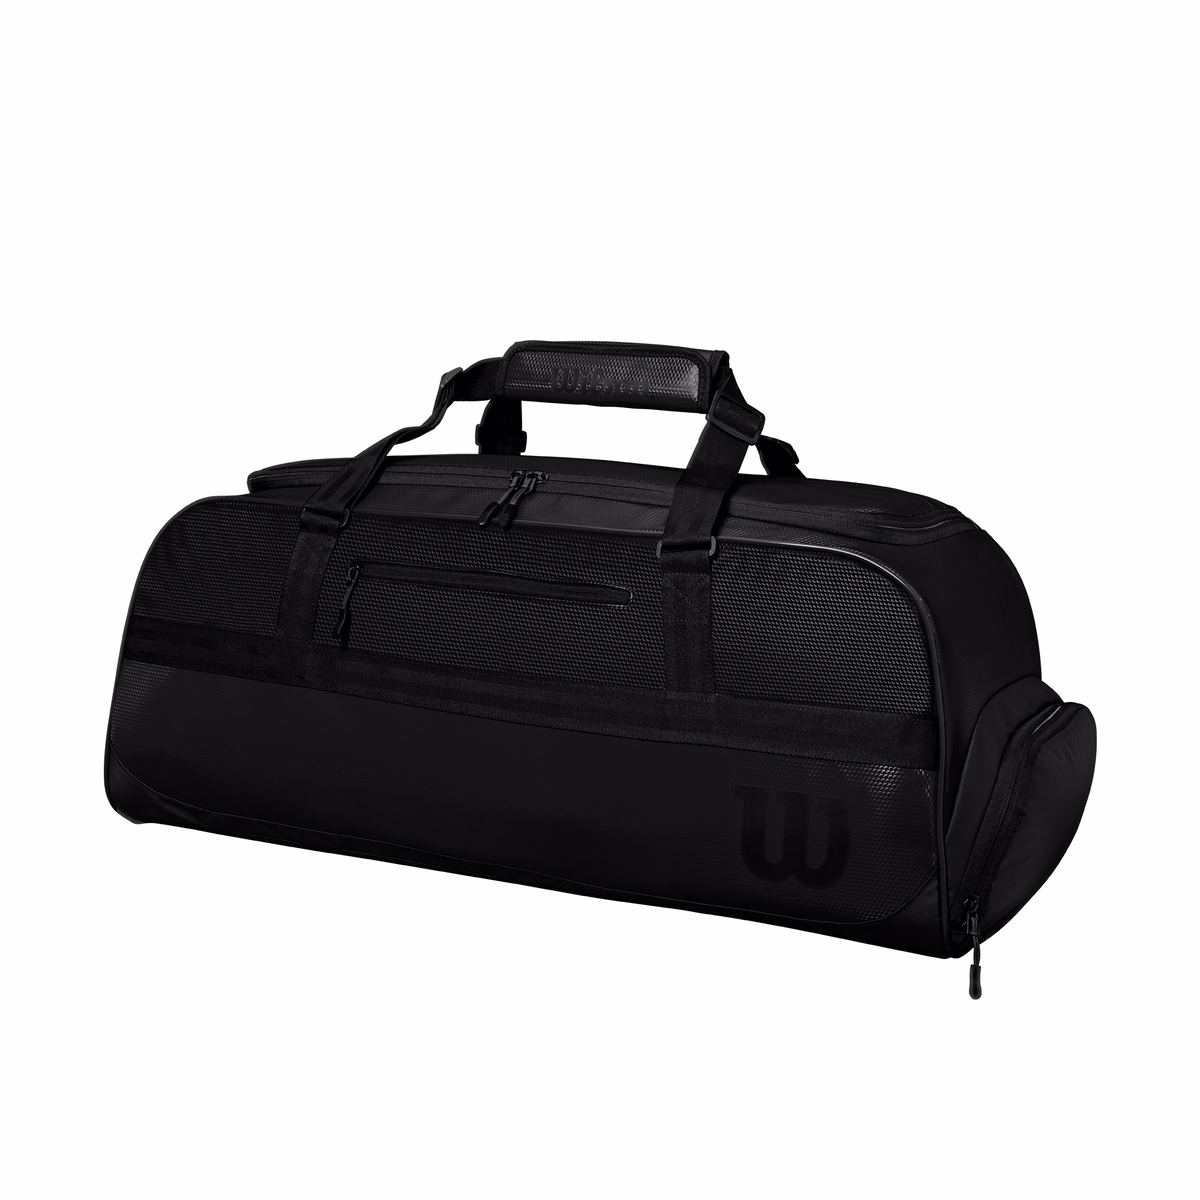 WR8002701_0_Tour_Duffle_Black_Front.png.high-res_1200x1200